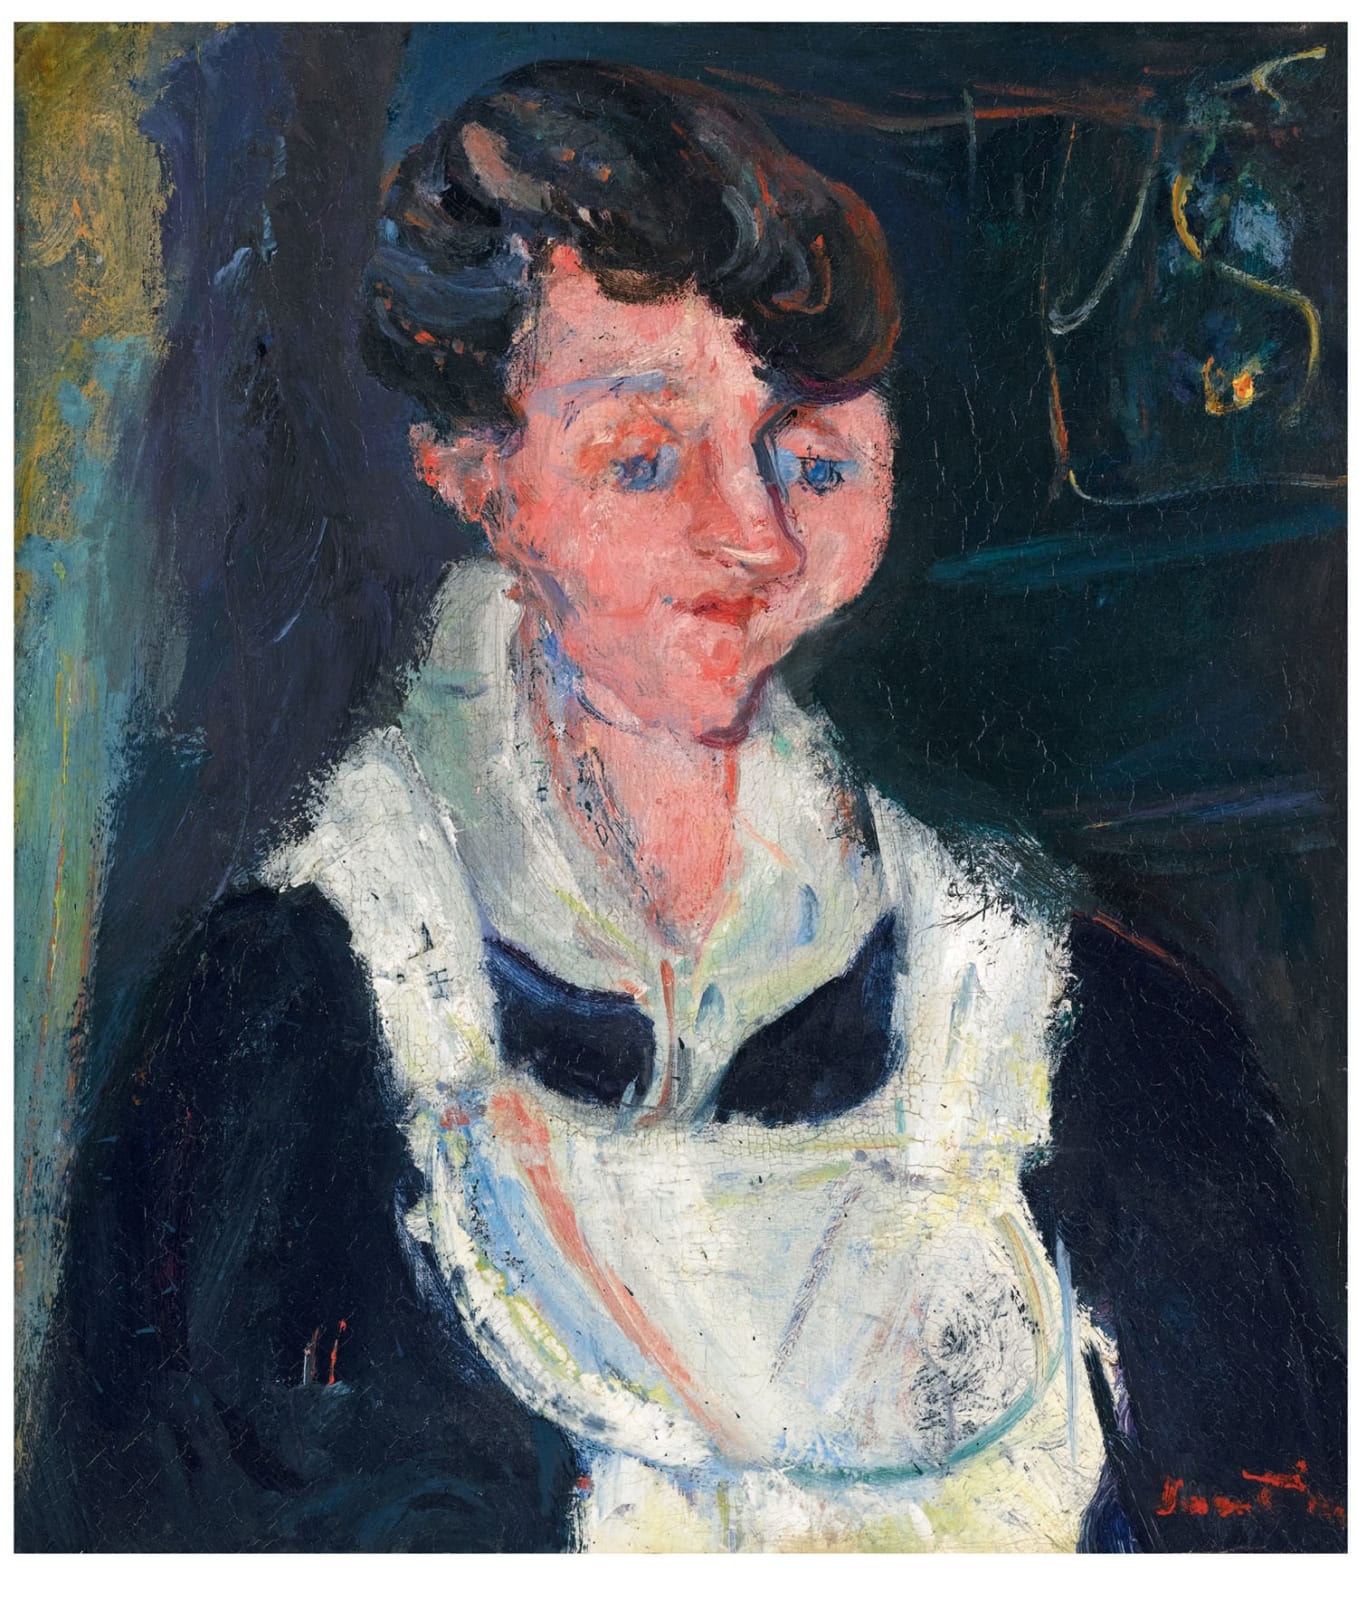 Chaim Soutine (1893-1943) Jeune Servante (Waiting Maid, also known as La Soubrette) 1933 Oil on canvas 46.5 × 40.5 cm Ben Uri Collection To see and discover more about this artist click here